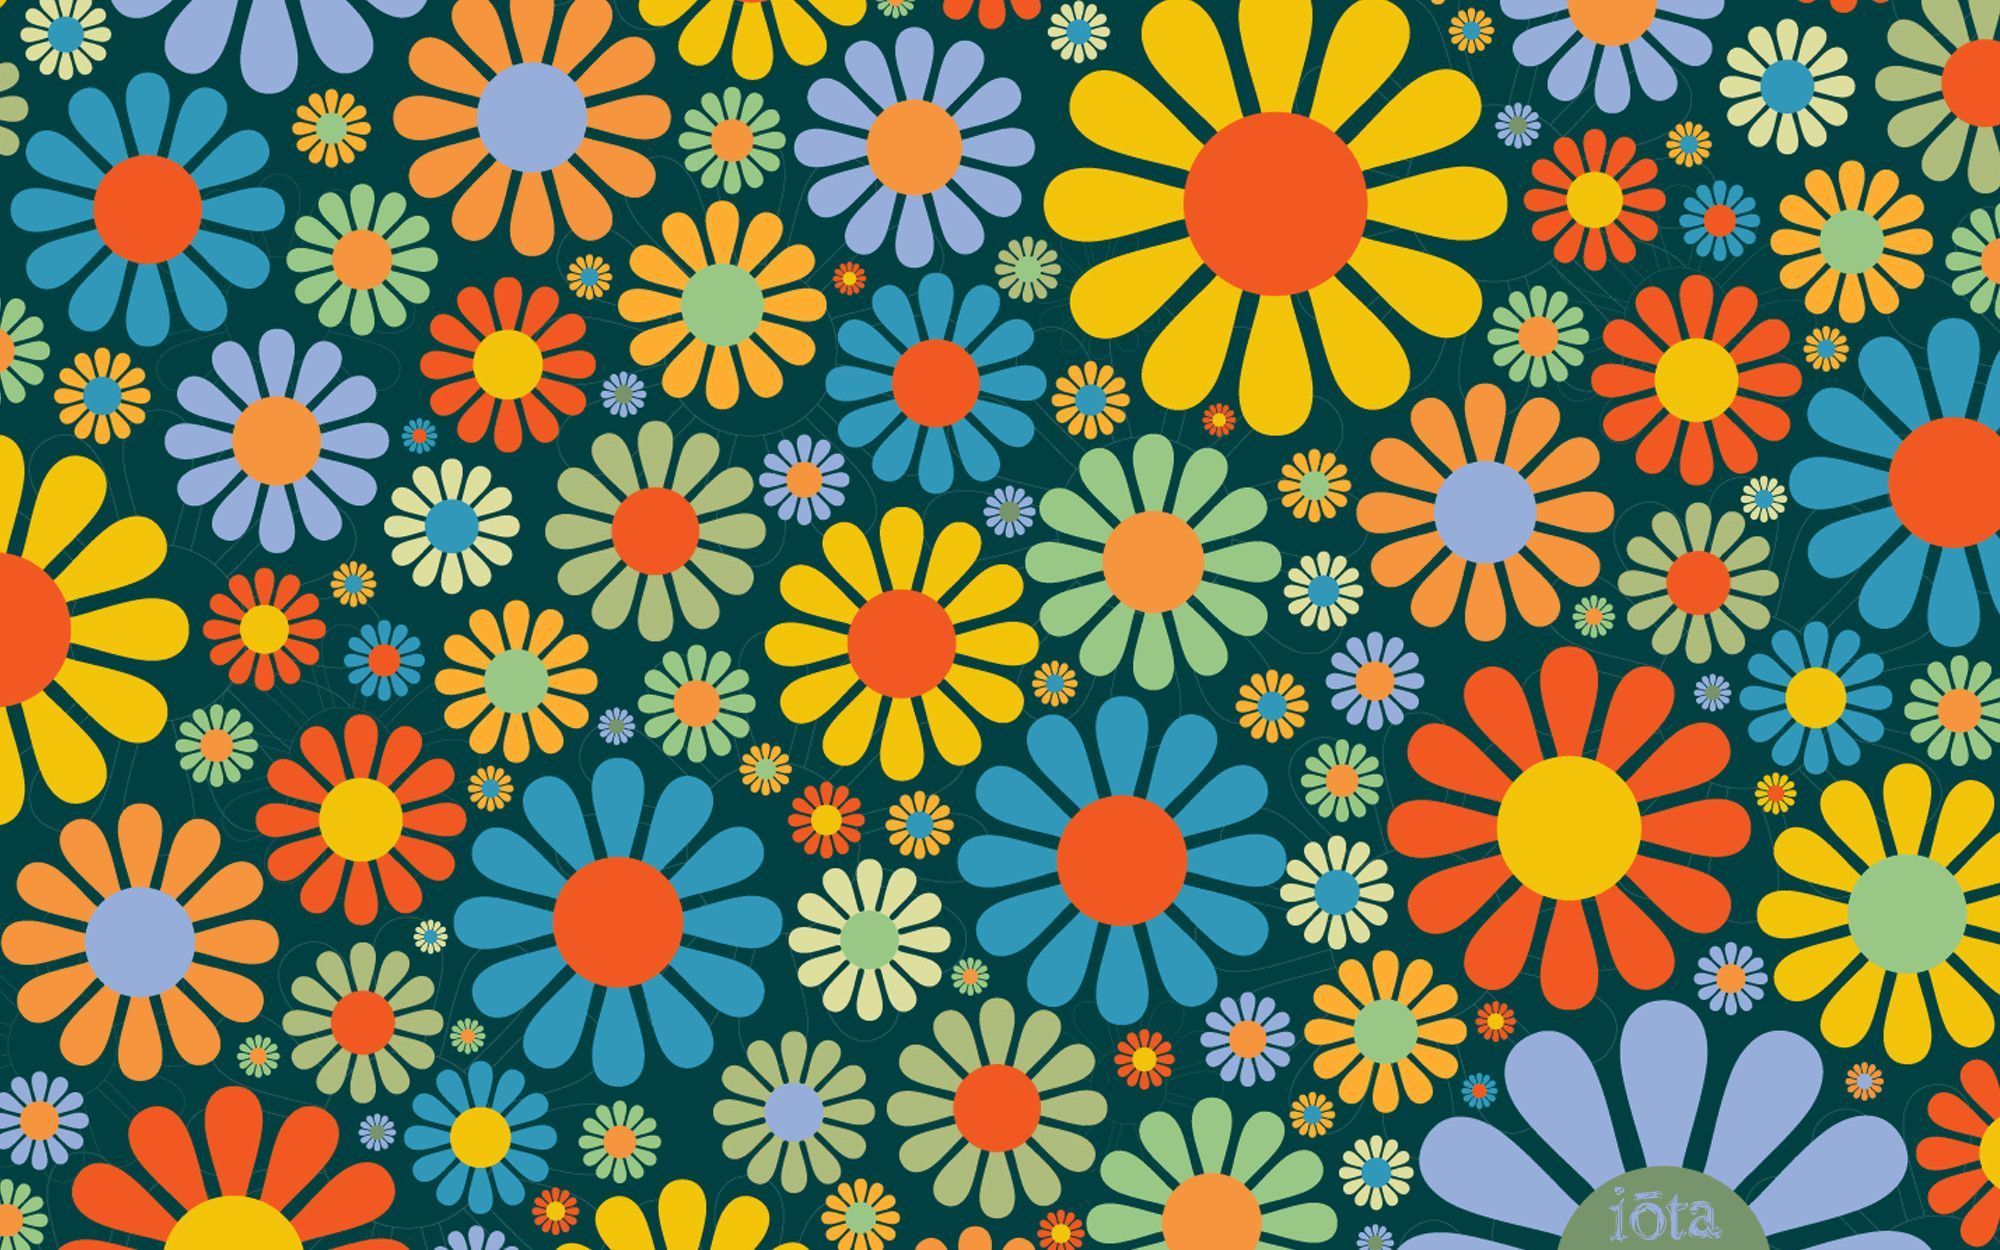 A seamless pattern of colorful flowers - 60s, 70s